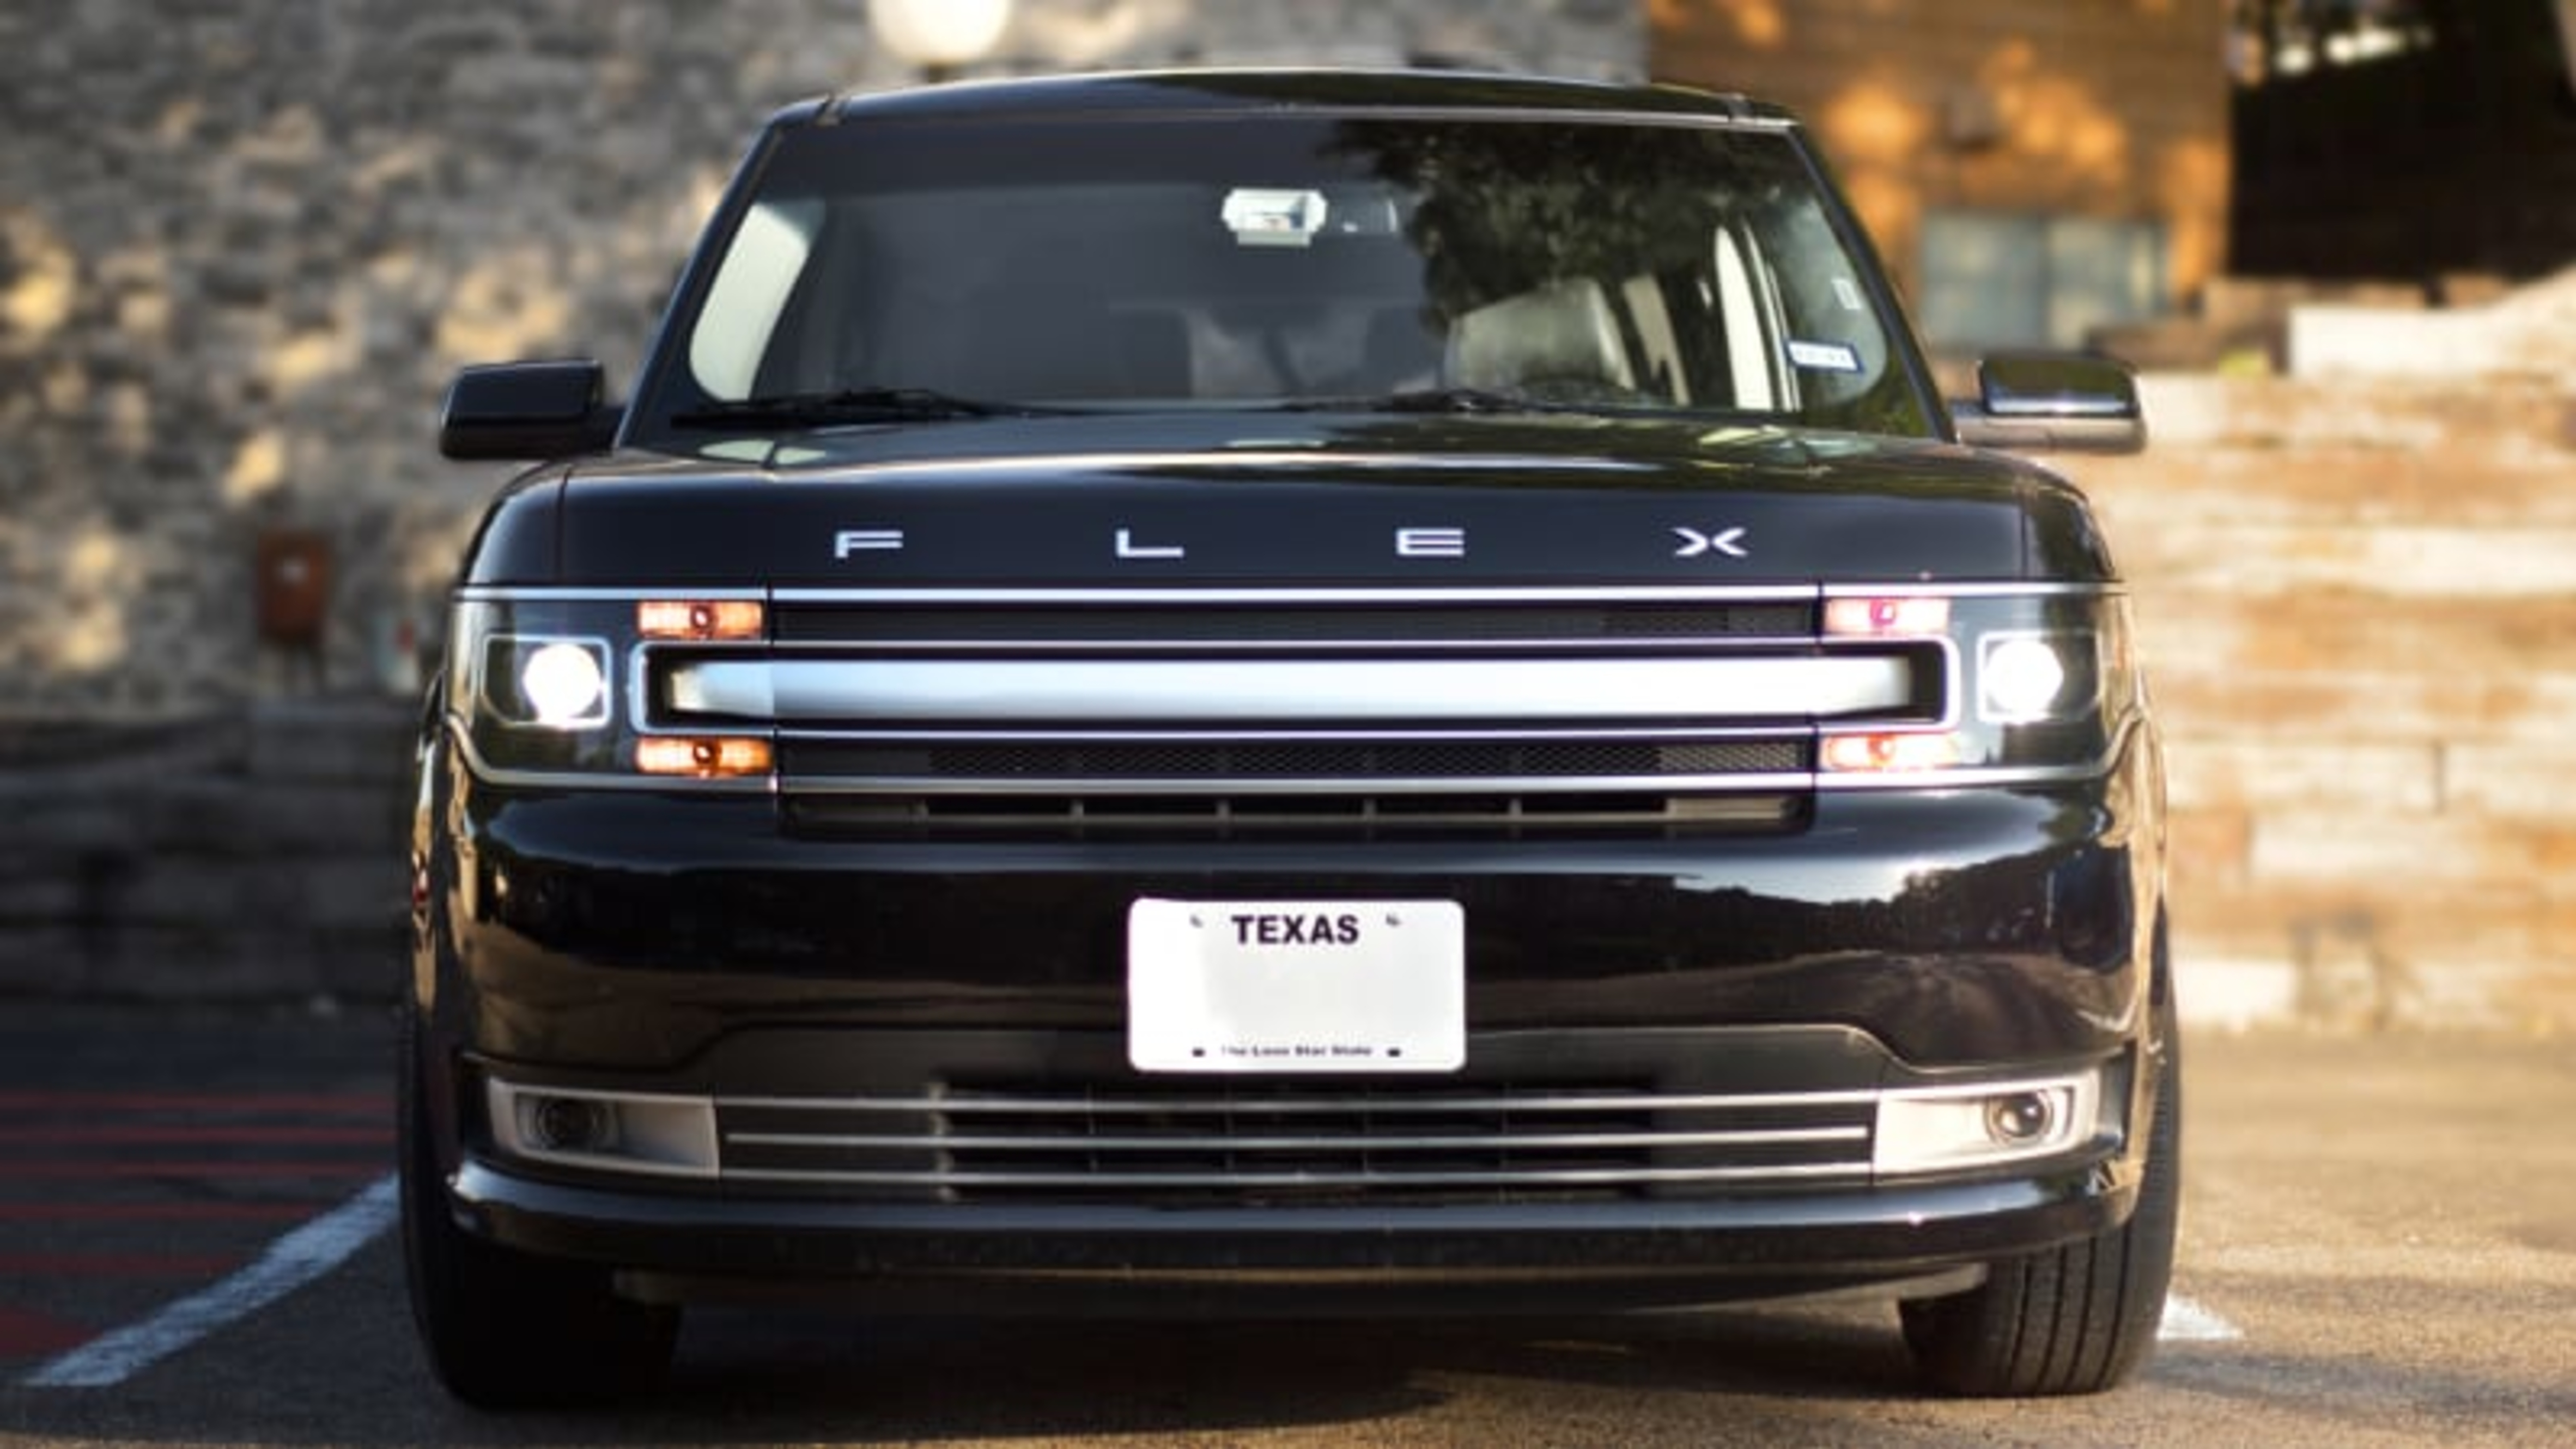 2016 Ford Flex - Willy Lamb / Inner Frame Photography